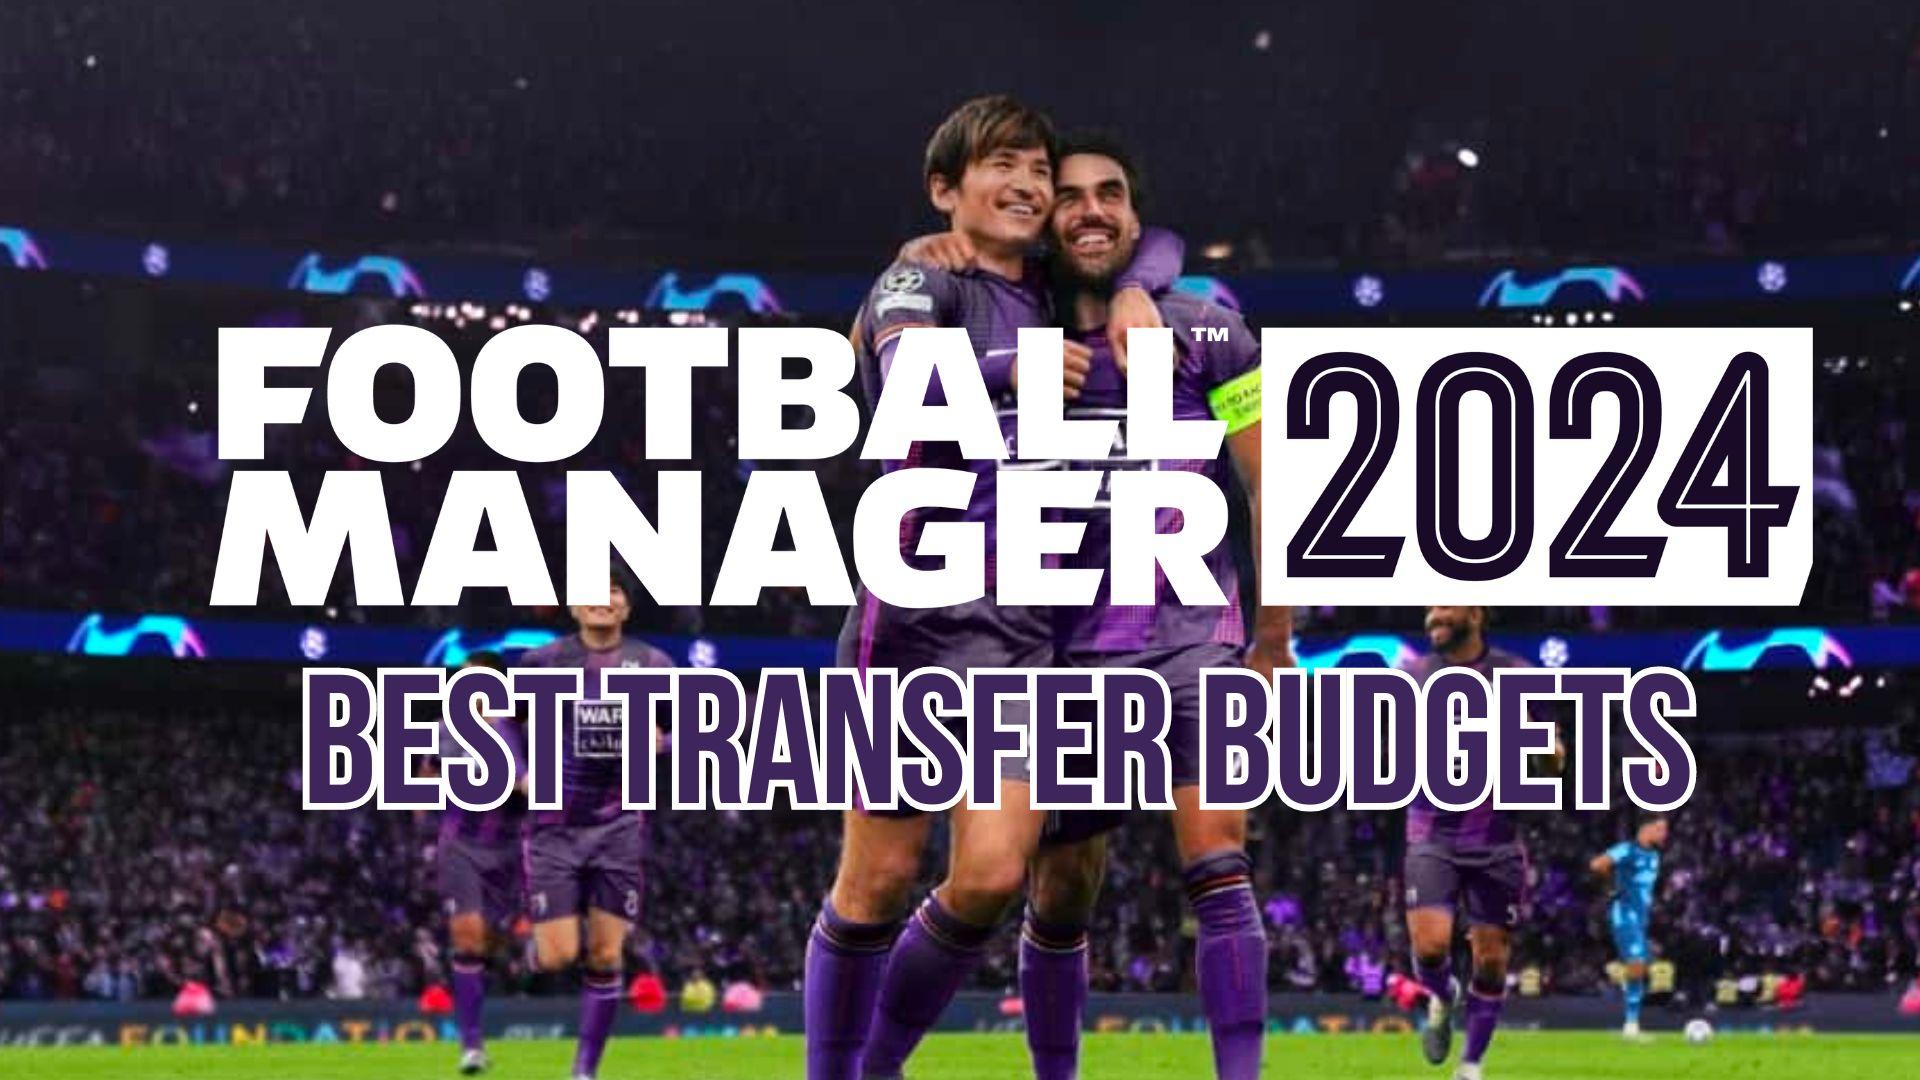 November 8th, 2022 ] NEW GAME: ‎Football Manager 2023 Touch : r